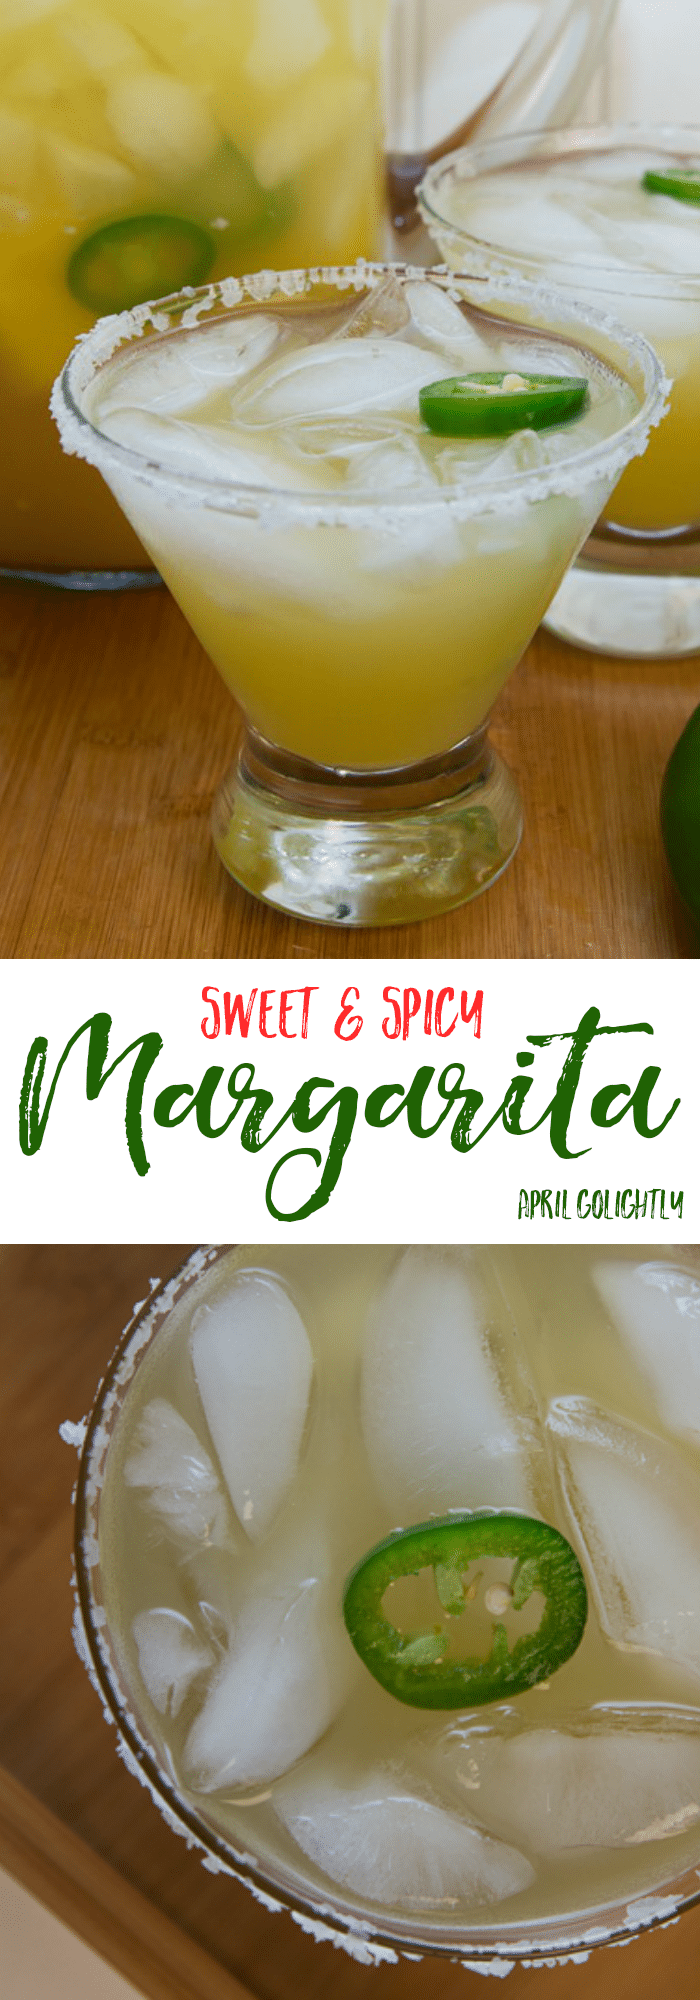 Sweet and Spicy Margarita Recipe that is skinny and made on the rocks or frozen in a pitcher to be served at a party